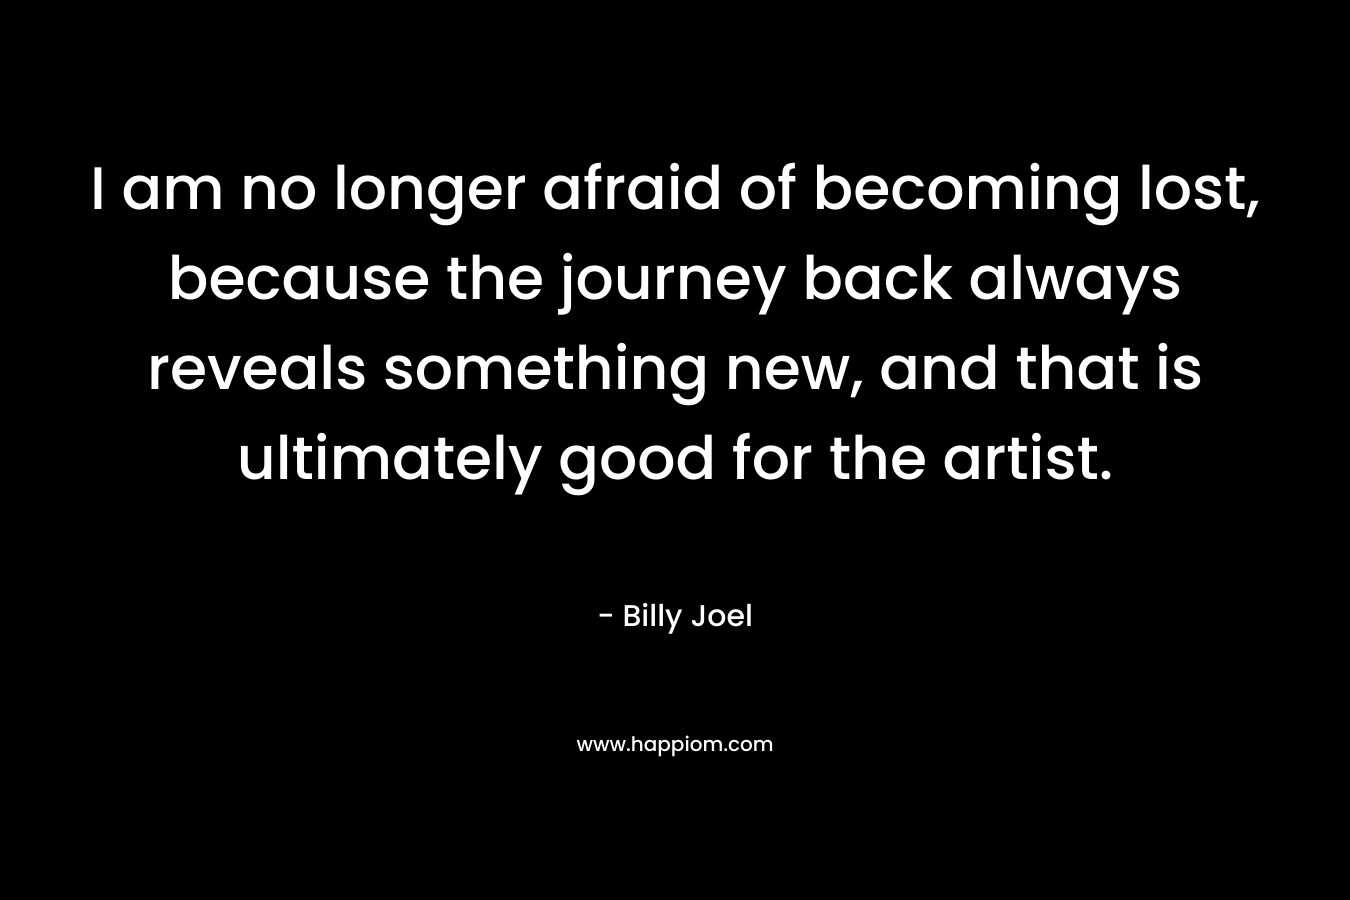 I am no longer afraid of becoming lost, because the journey back always reveals something new, and that is ultimately good for the artist. – Billy Joel